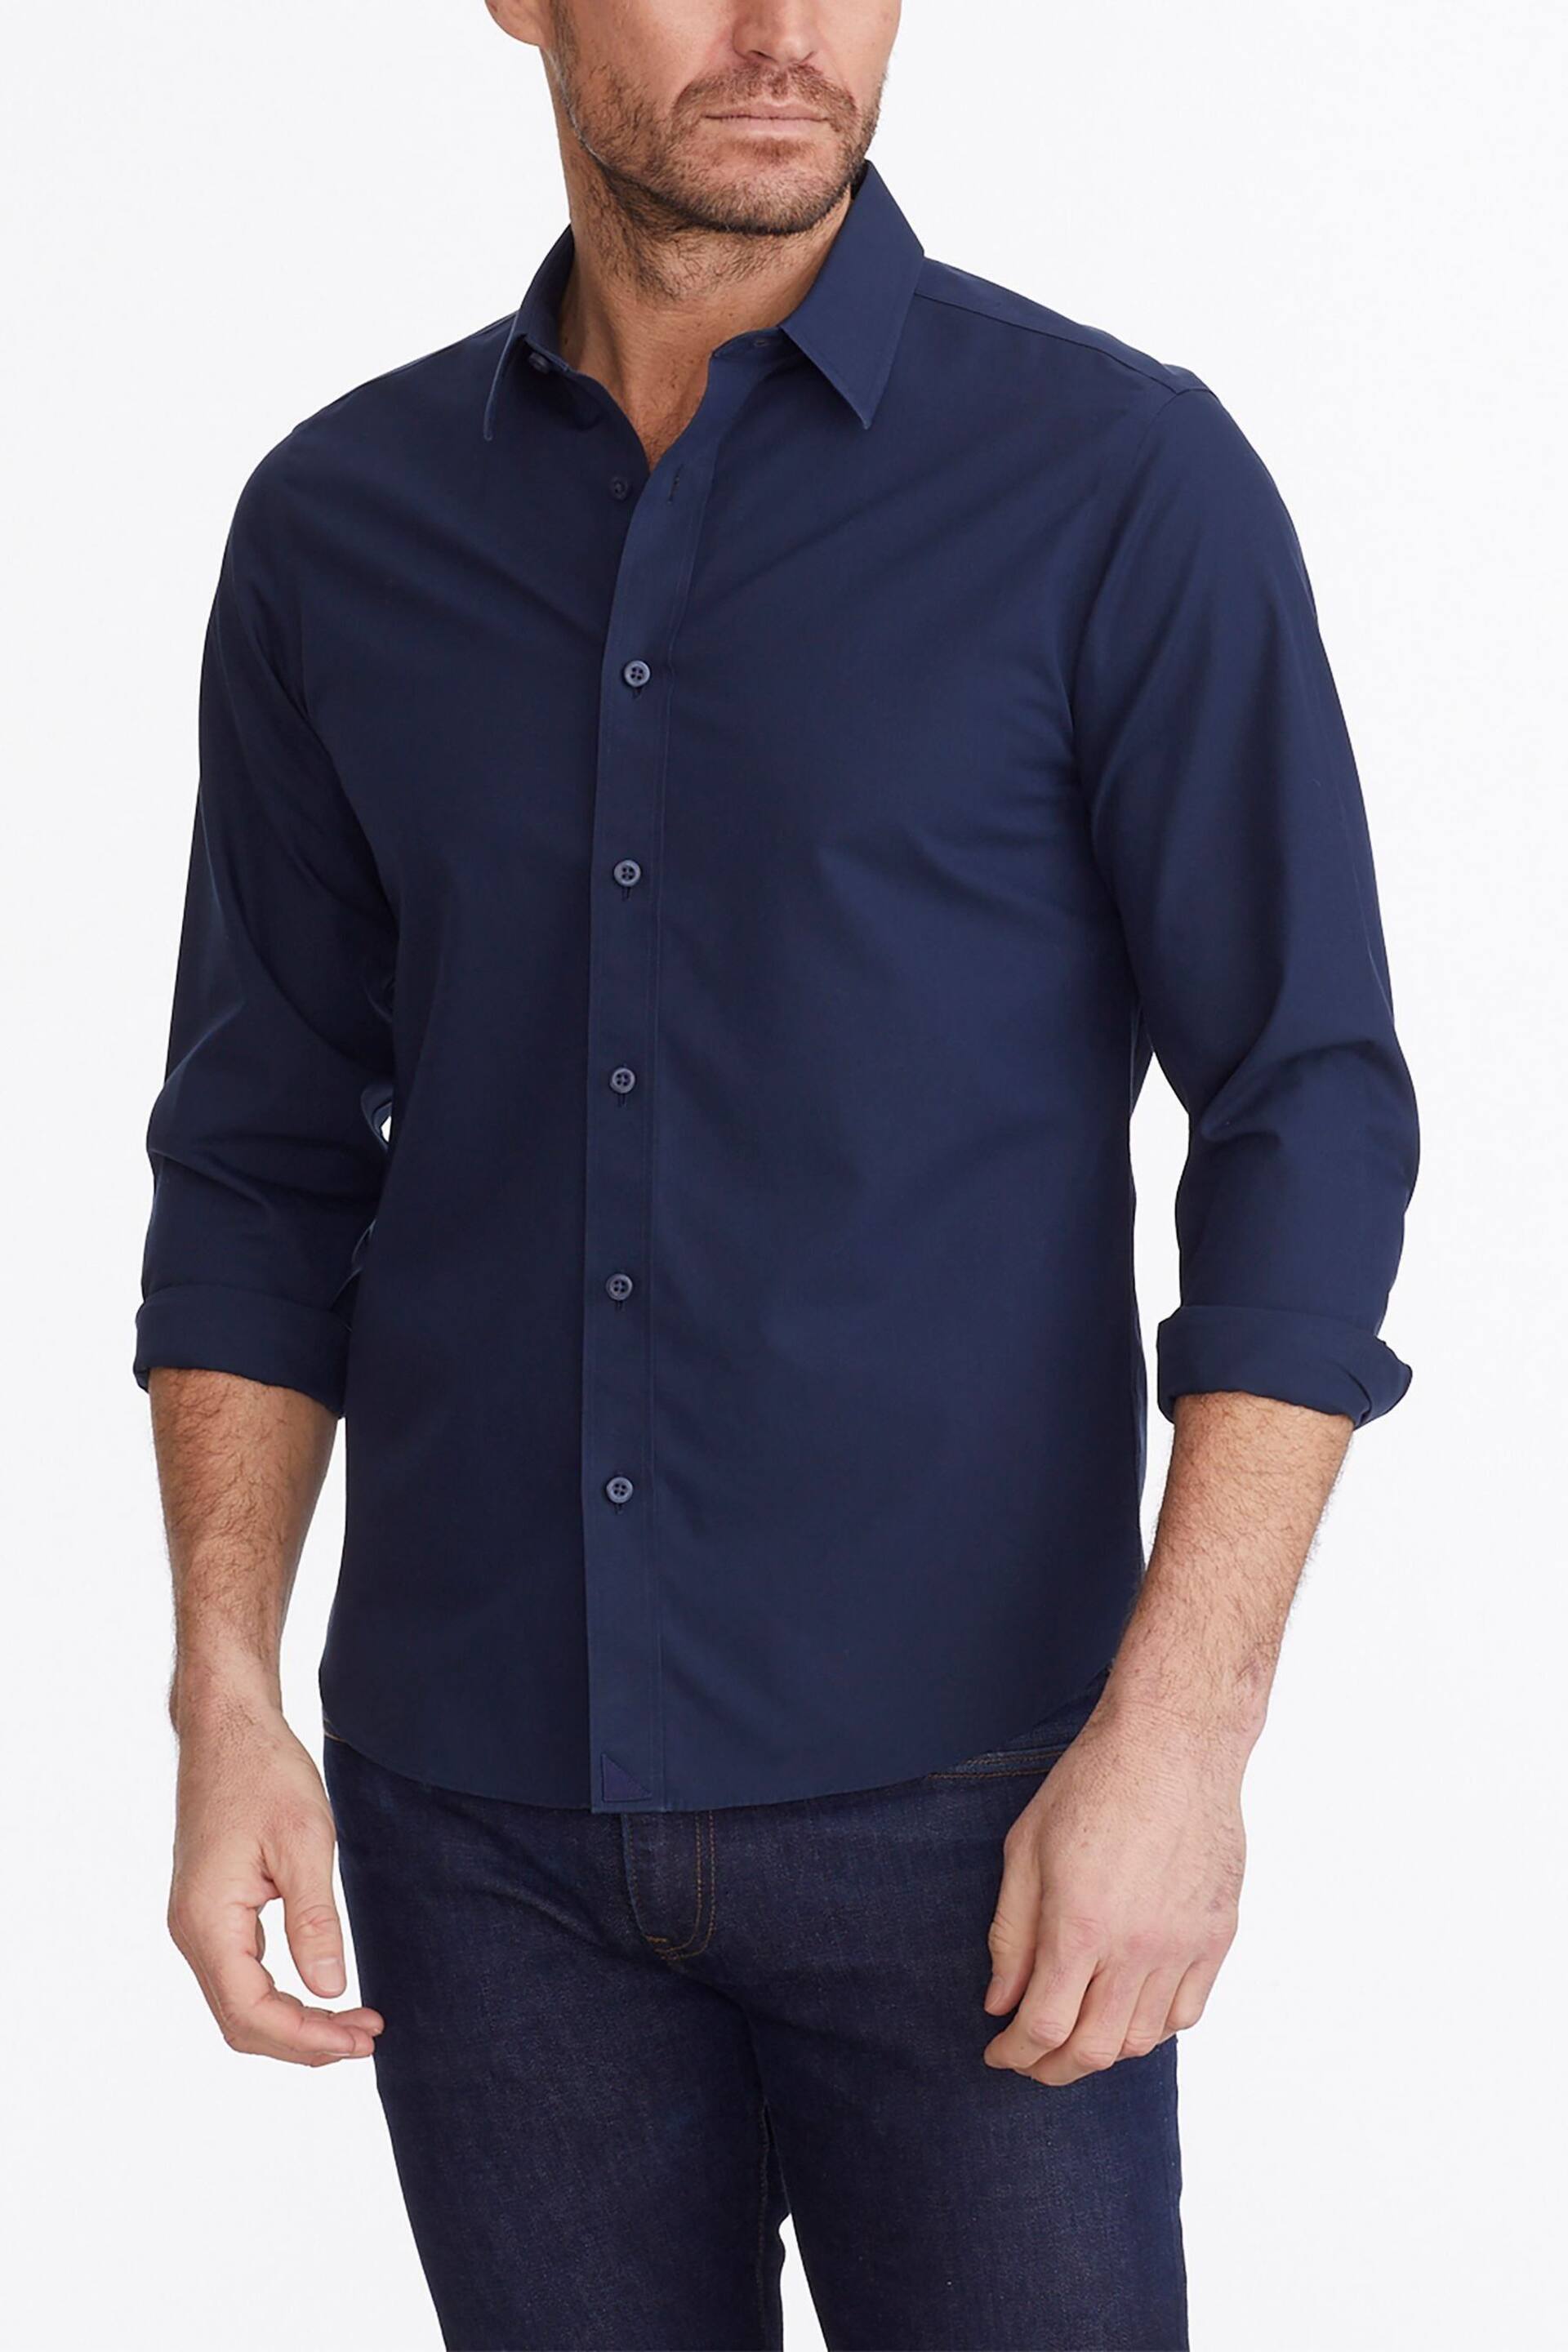 UNTUCKit Navy Blue Wrinkle-Free Relaxed Fit Castello Shirt - Image 4 of 6